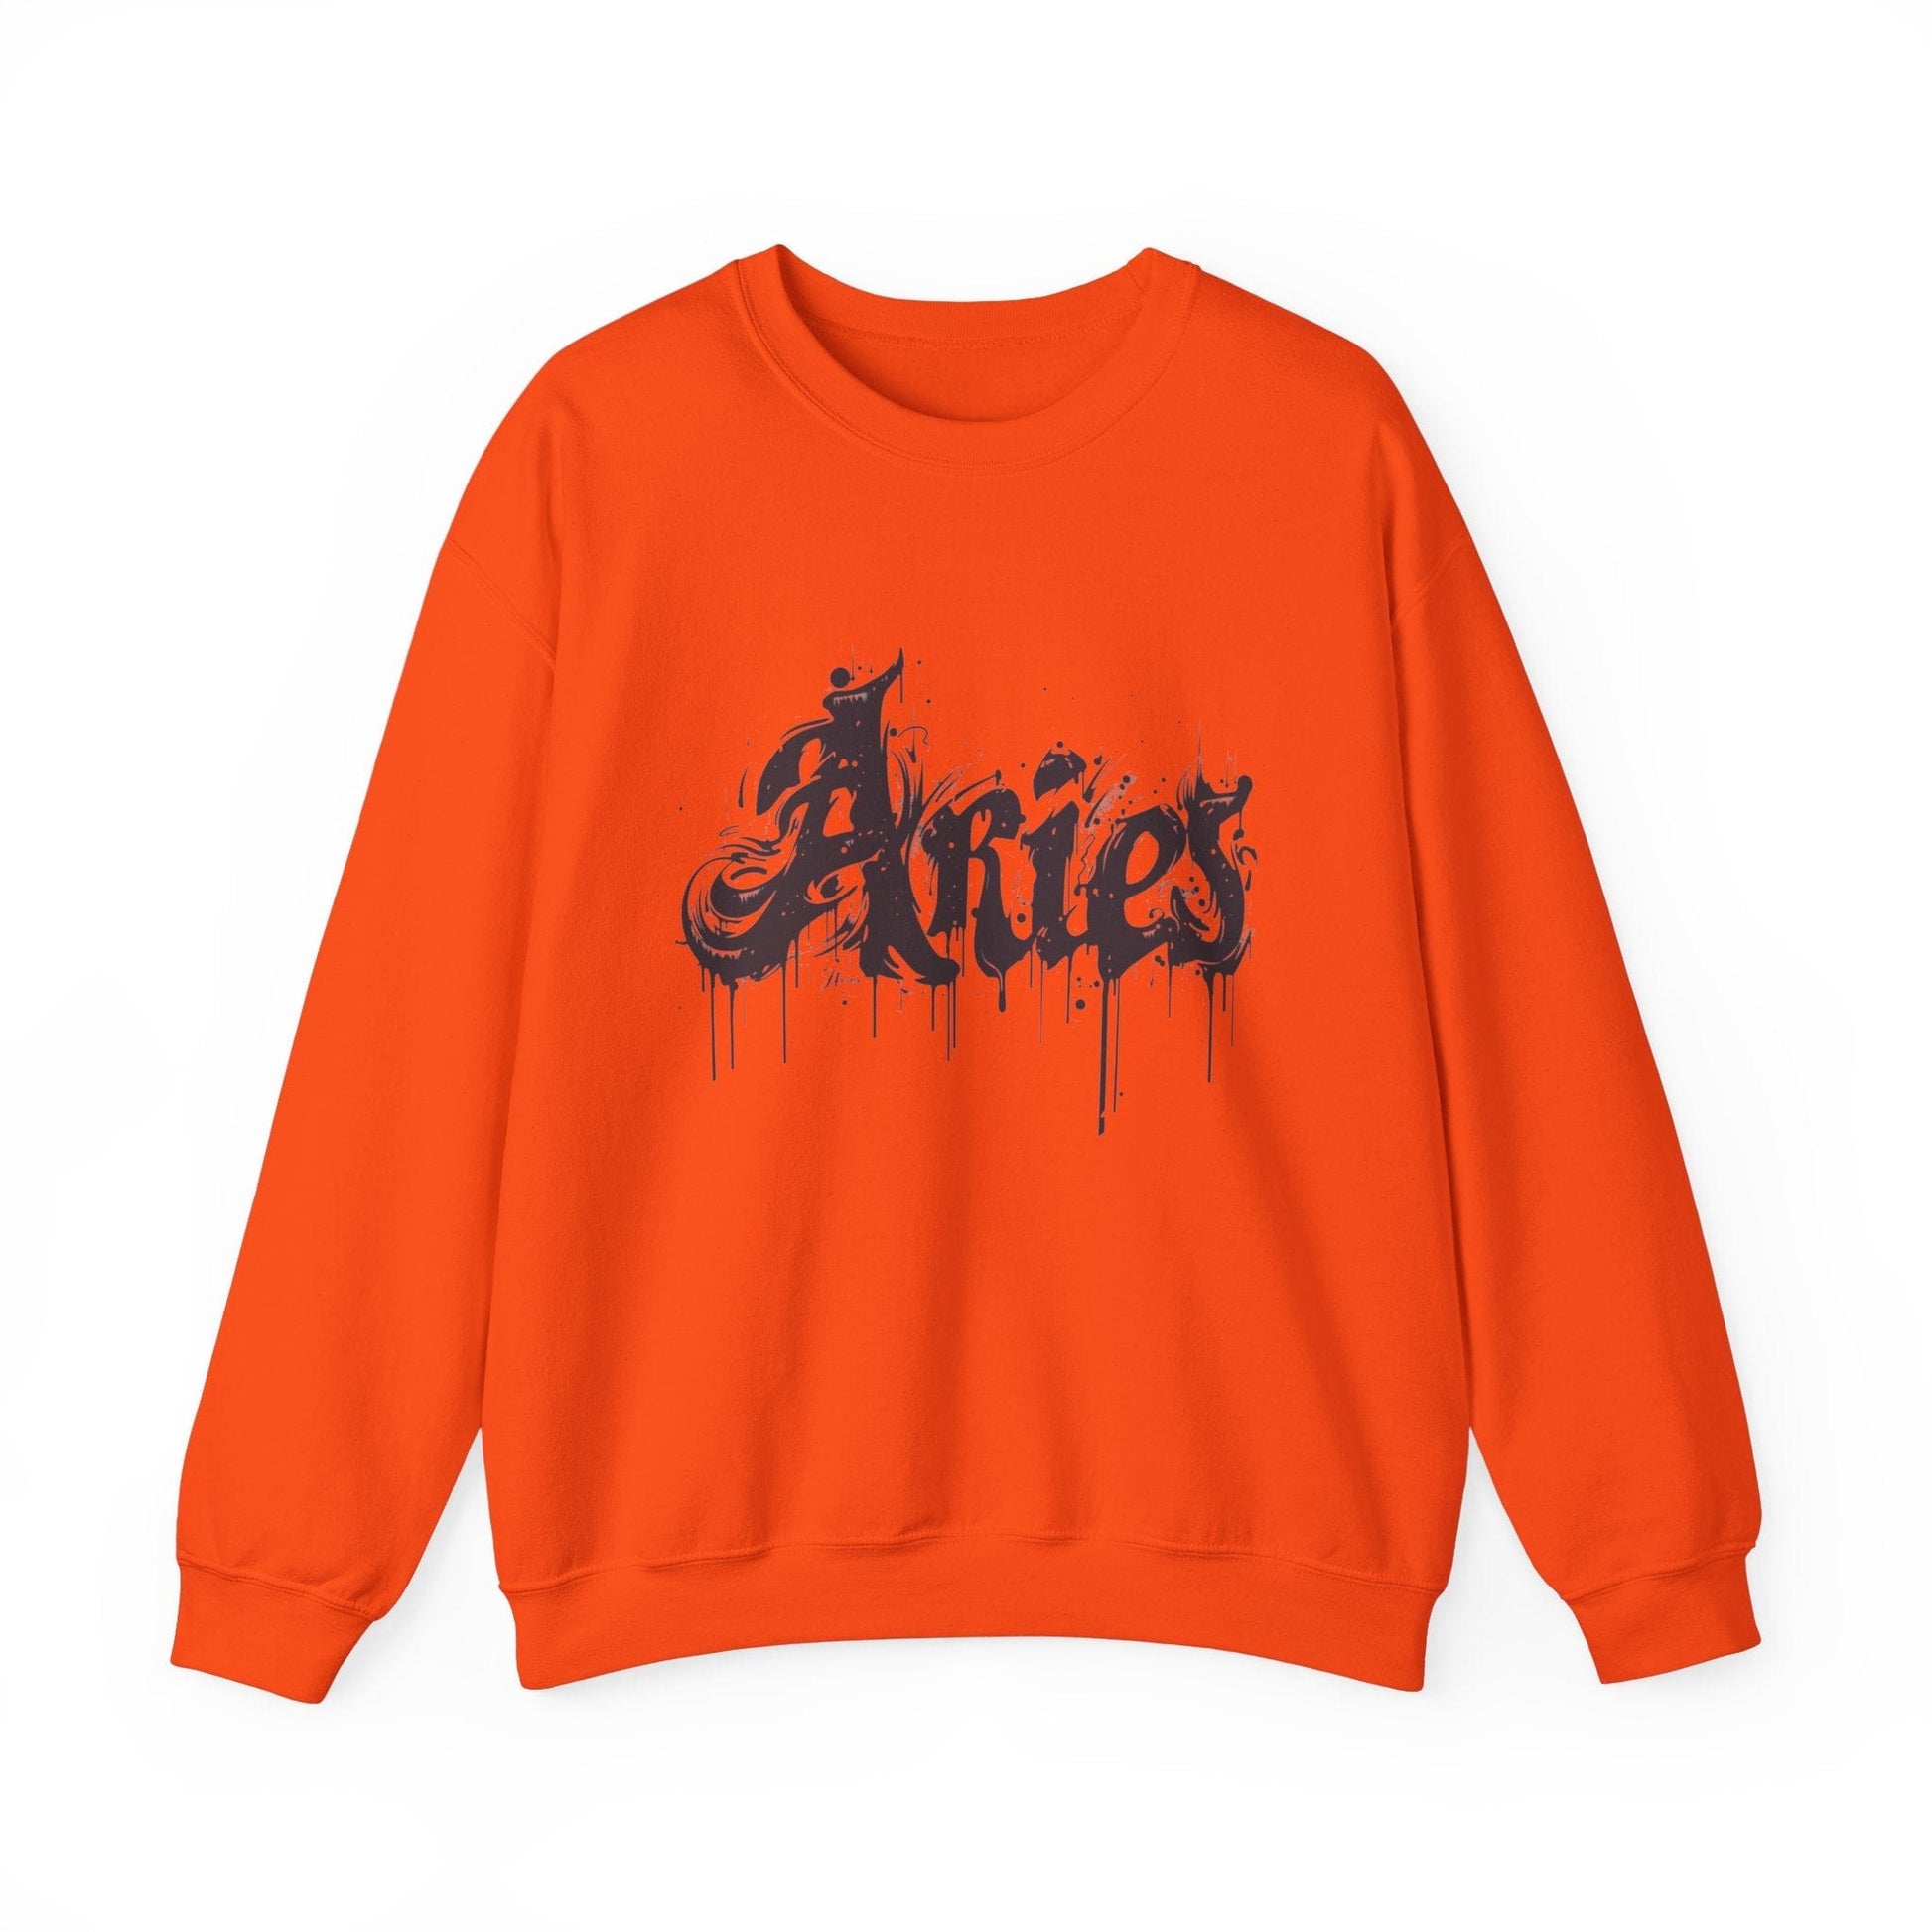 Sweatshirt S / Orange Ink-Dripped Aries Energy Soft Sweater: Embrace Your Fire